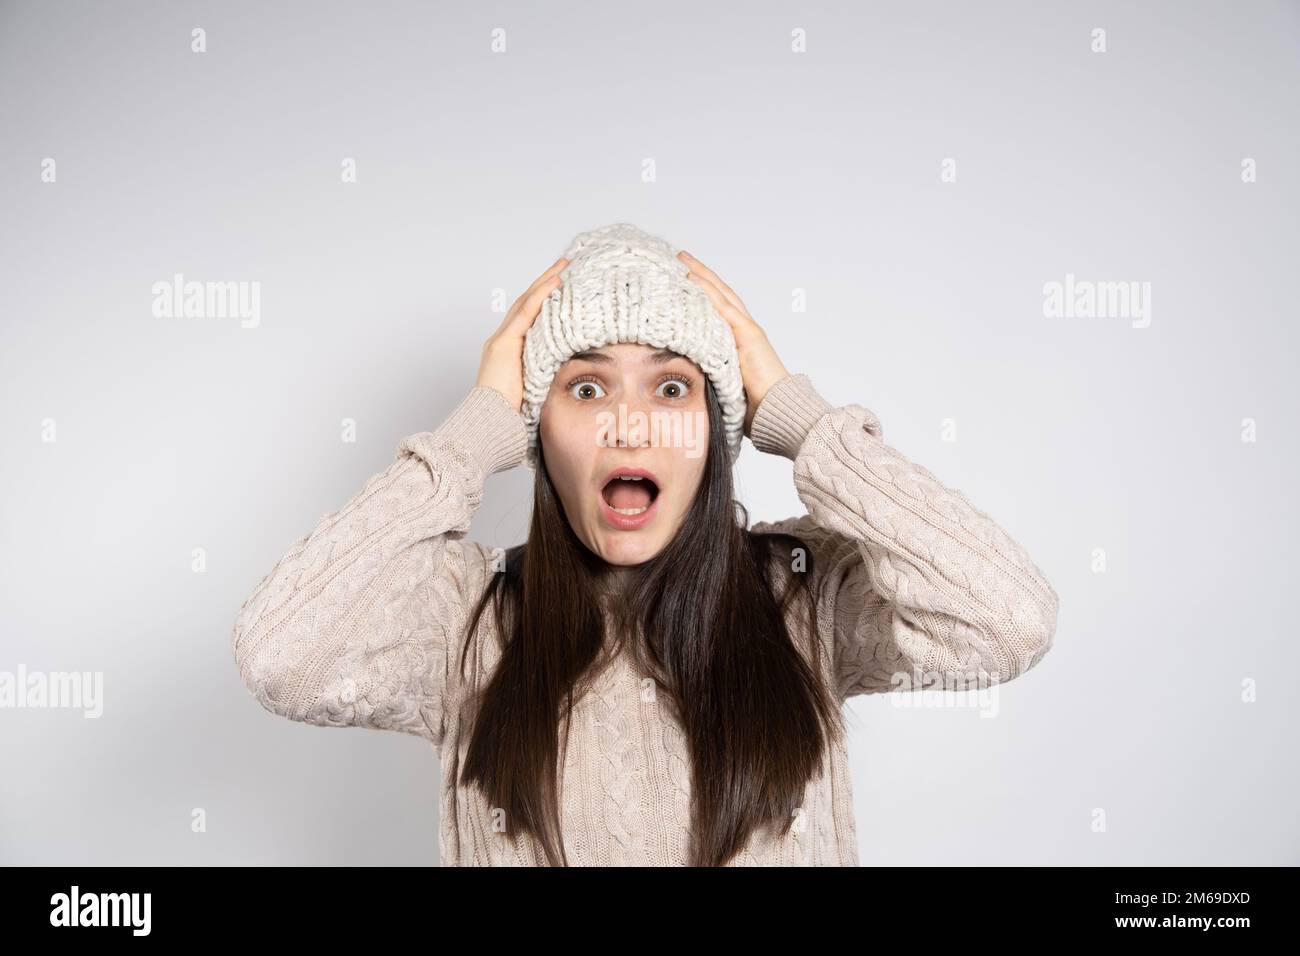 A young brunette woman in a hat and sweater looks into the camera and screams holding her hands to her head. Stock Photo